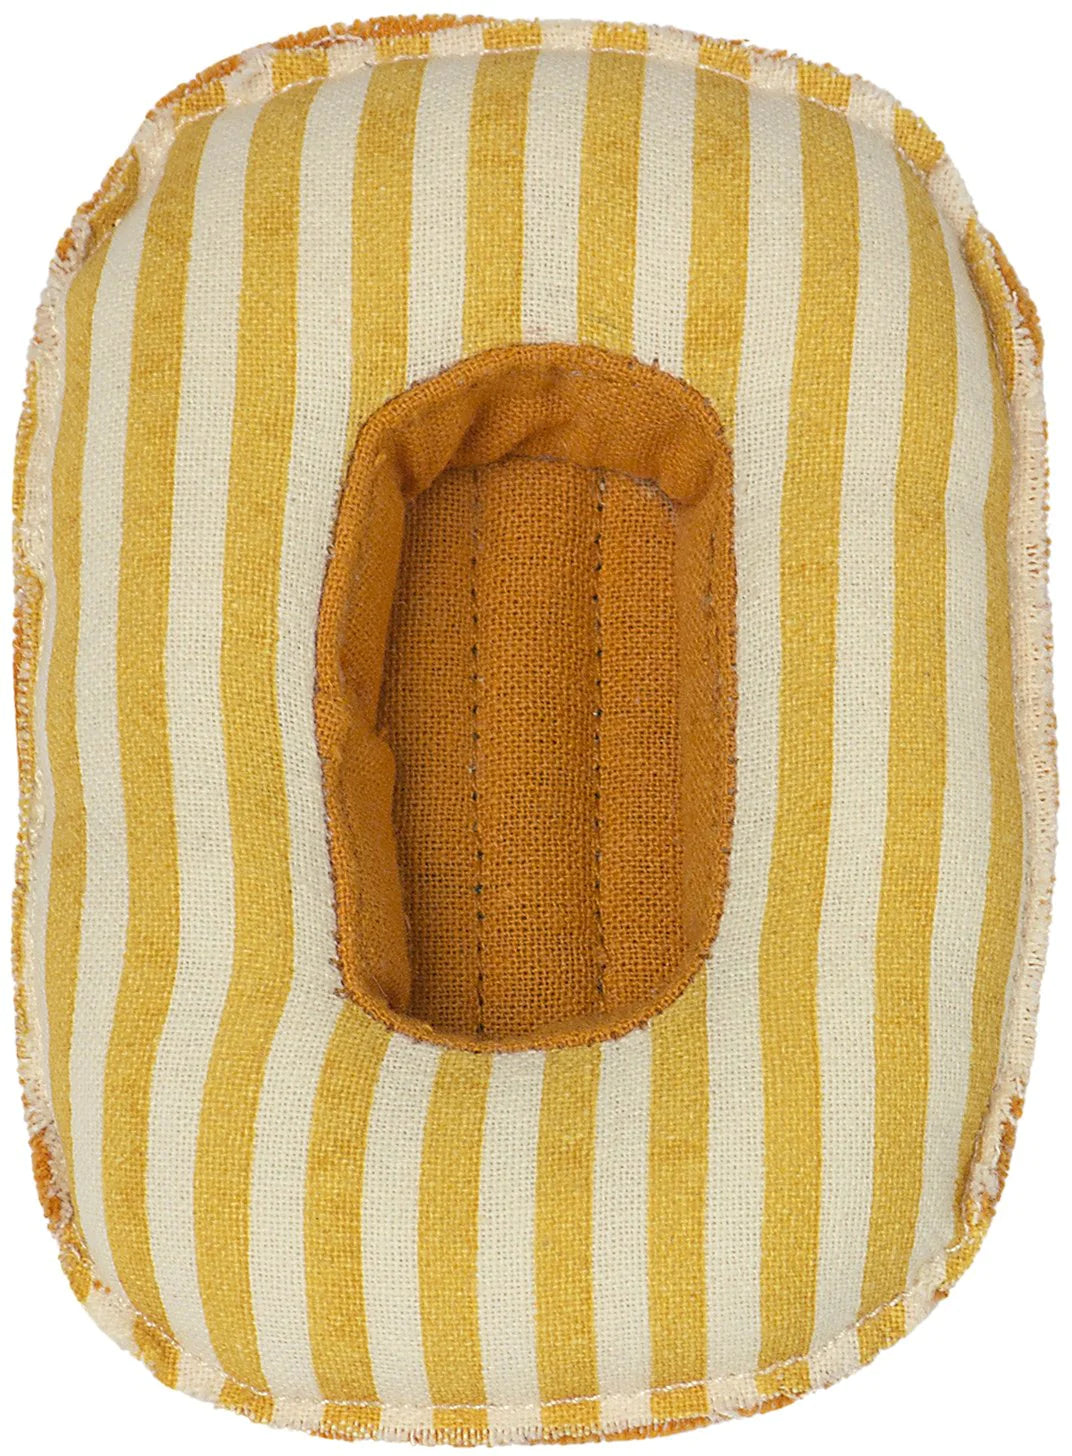 Rubber Boat for Small Mouse- Yellow Stripe